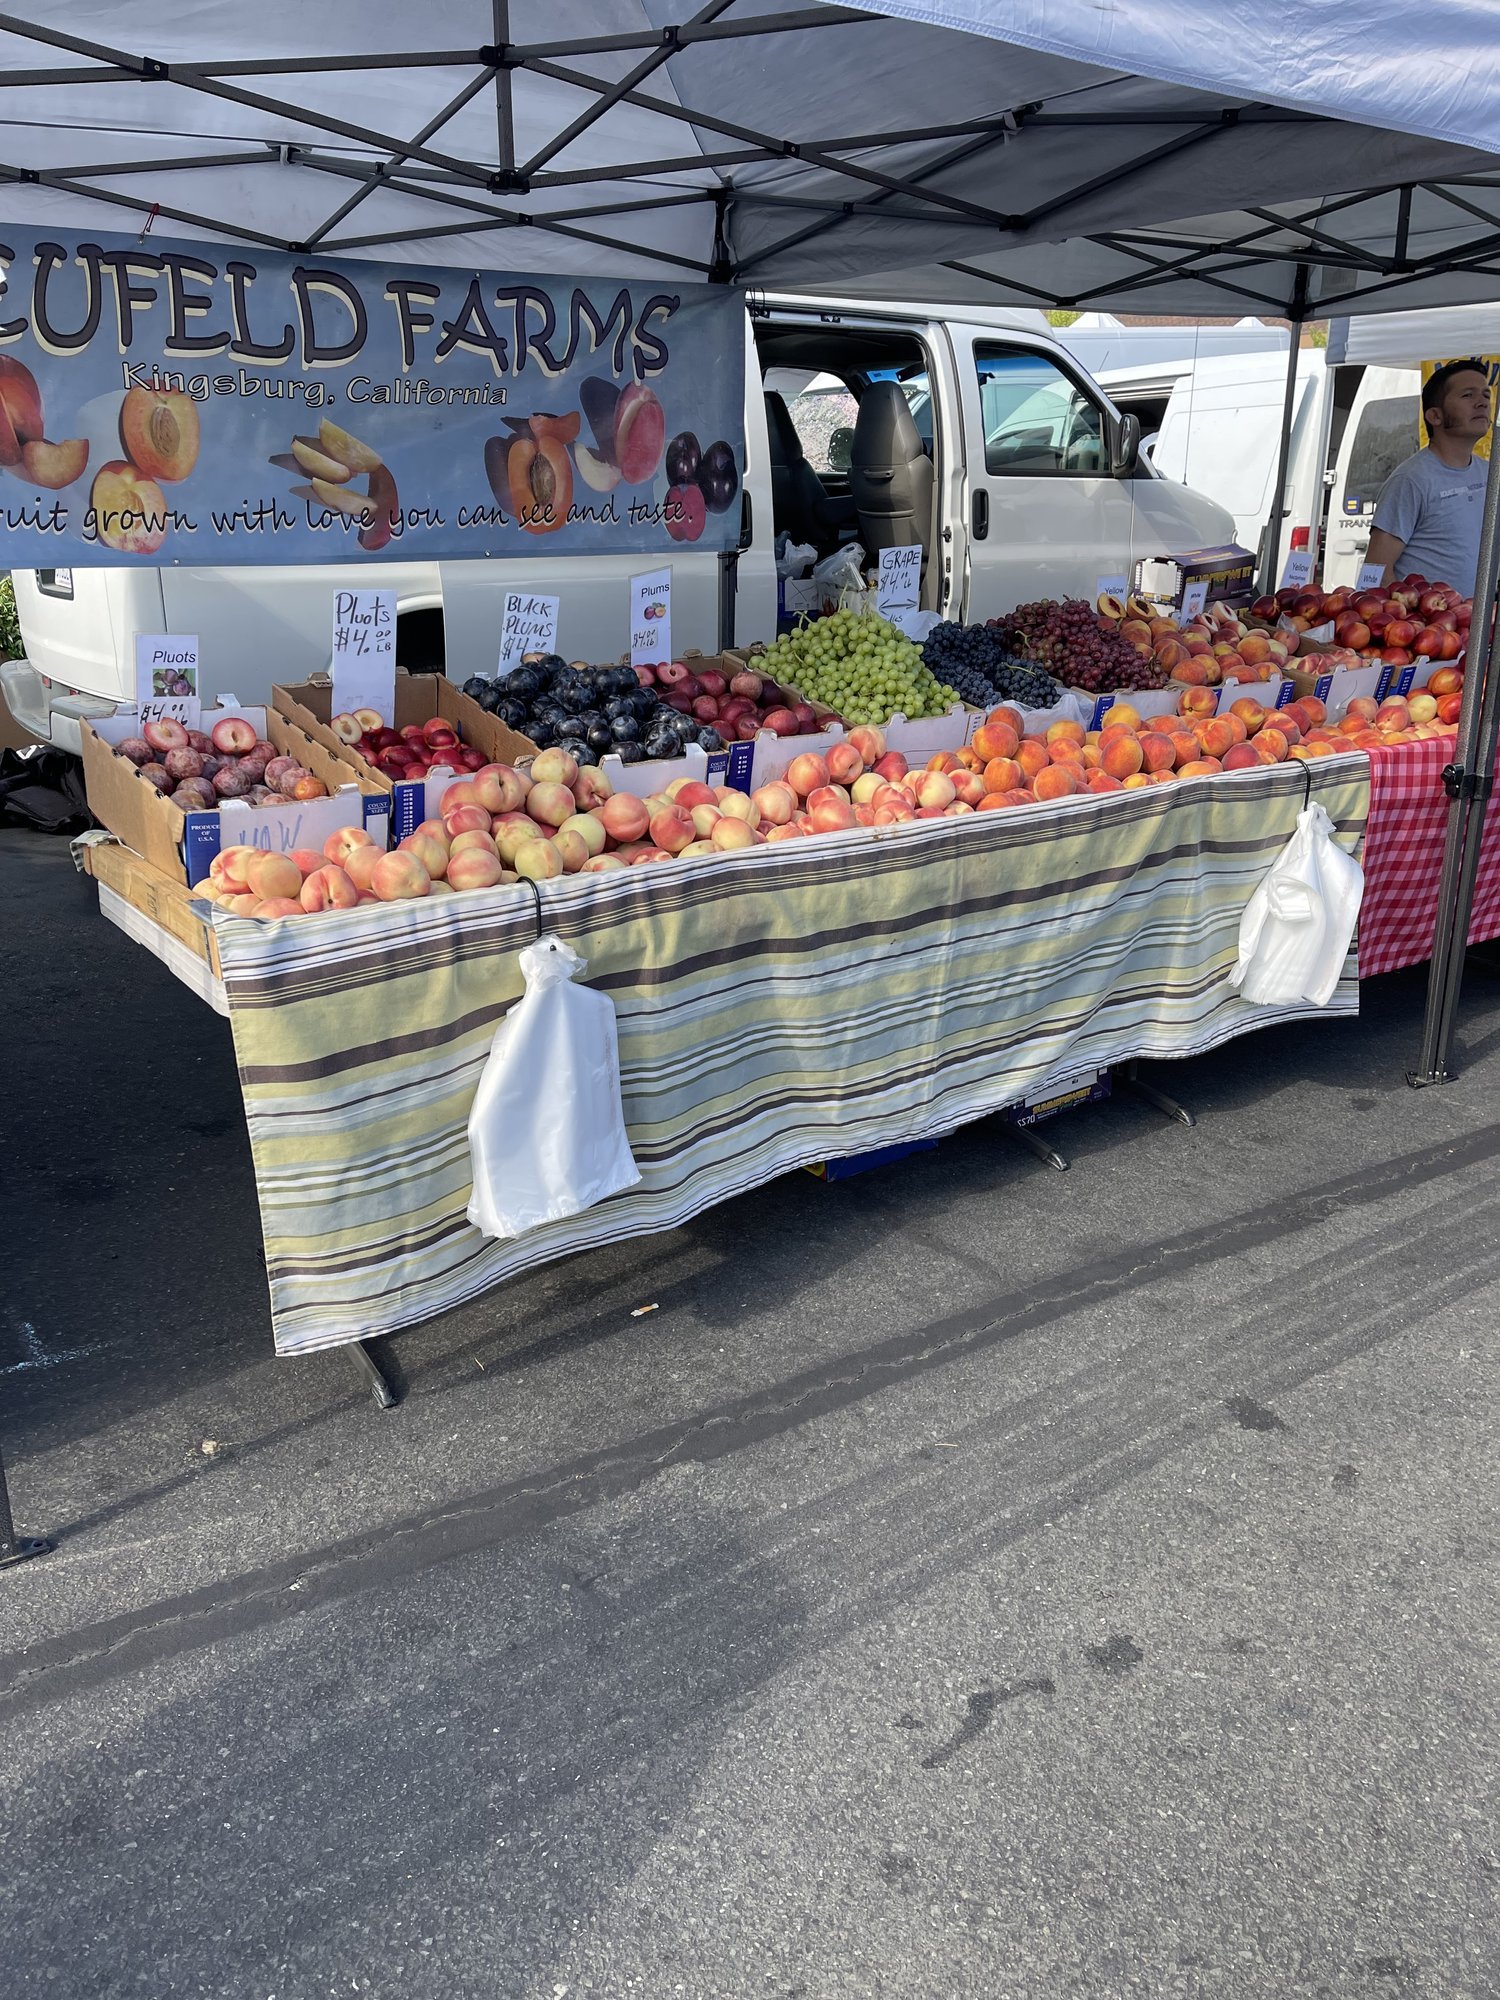  A farmers market stand with colorful produce piled high including apples, peaches, plums, grapes, and berries. The fruit is labeled with handwritten signs and is in front of a van and sign for the farm.  